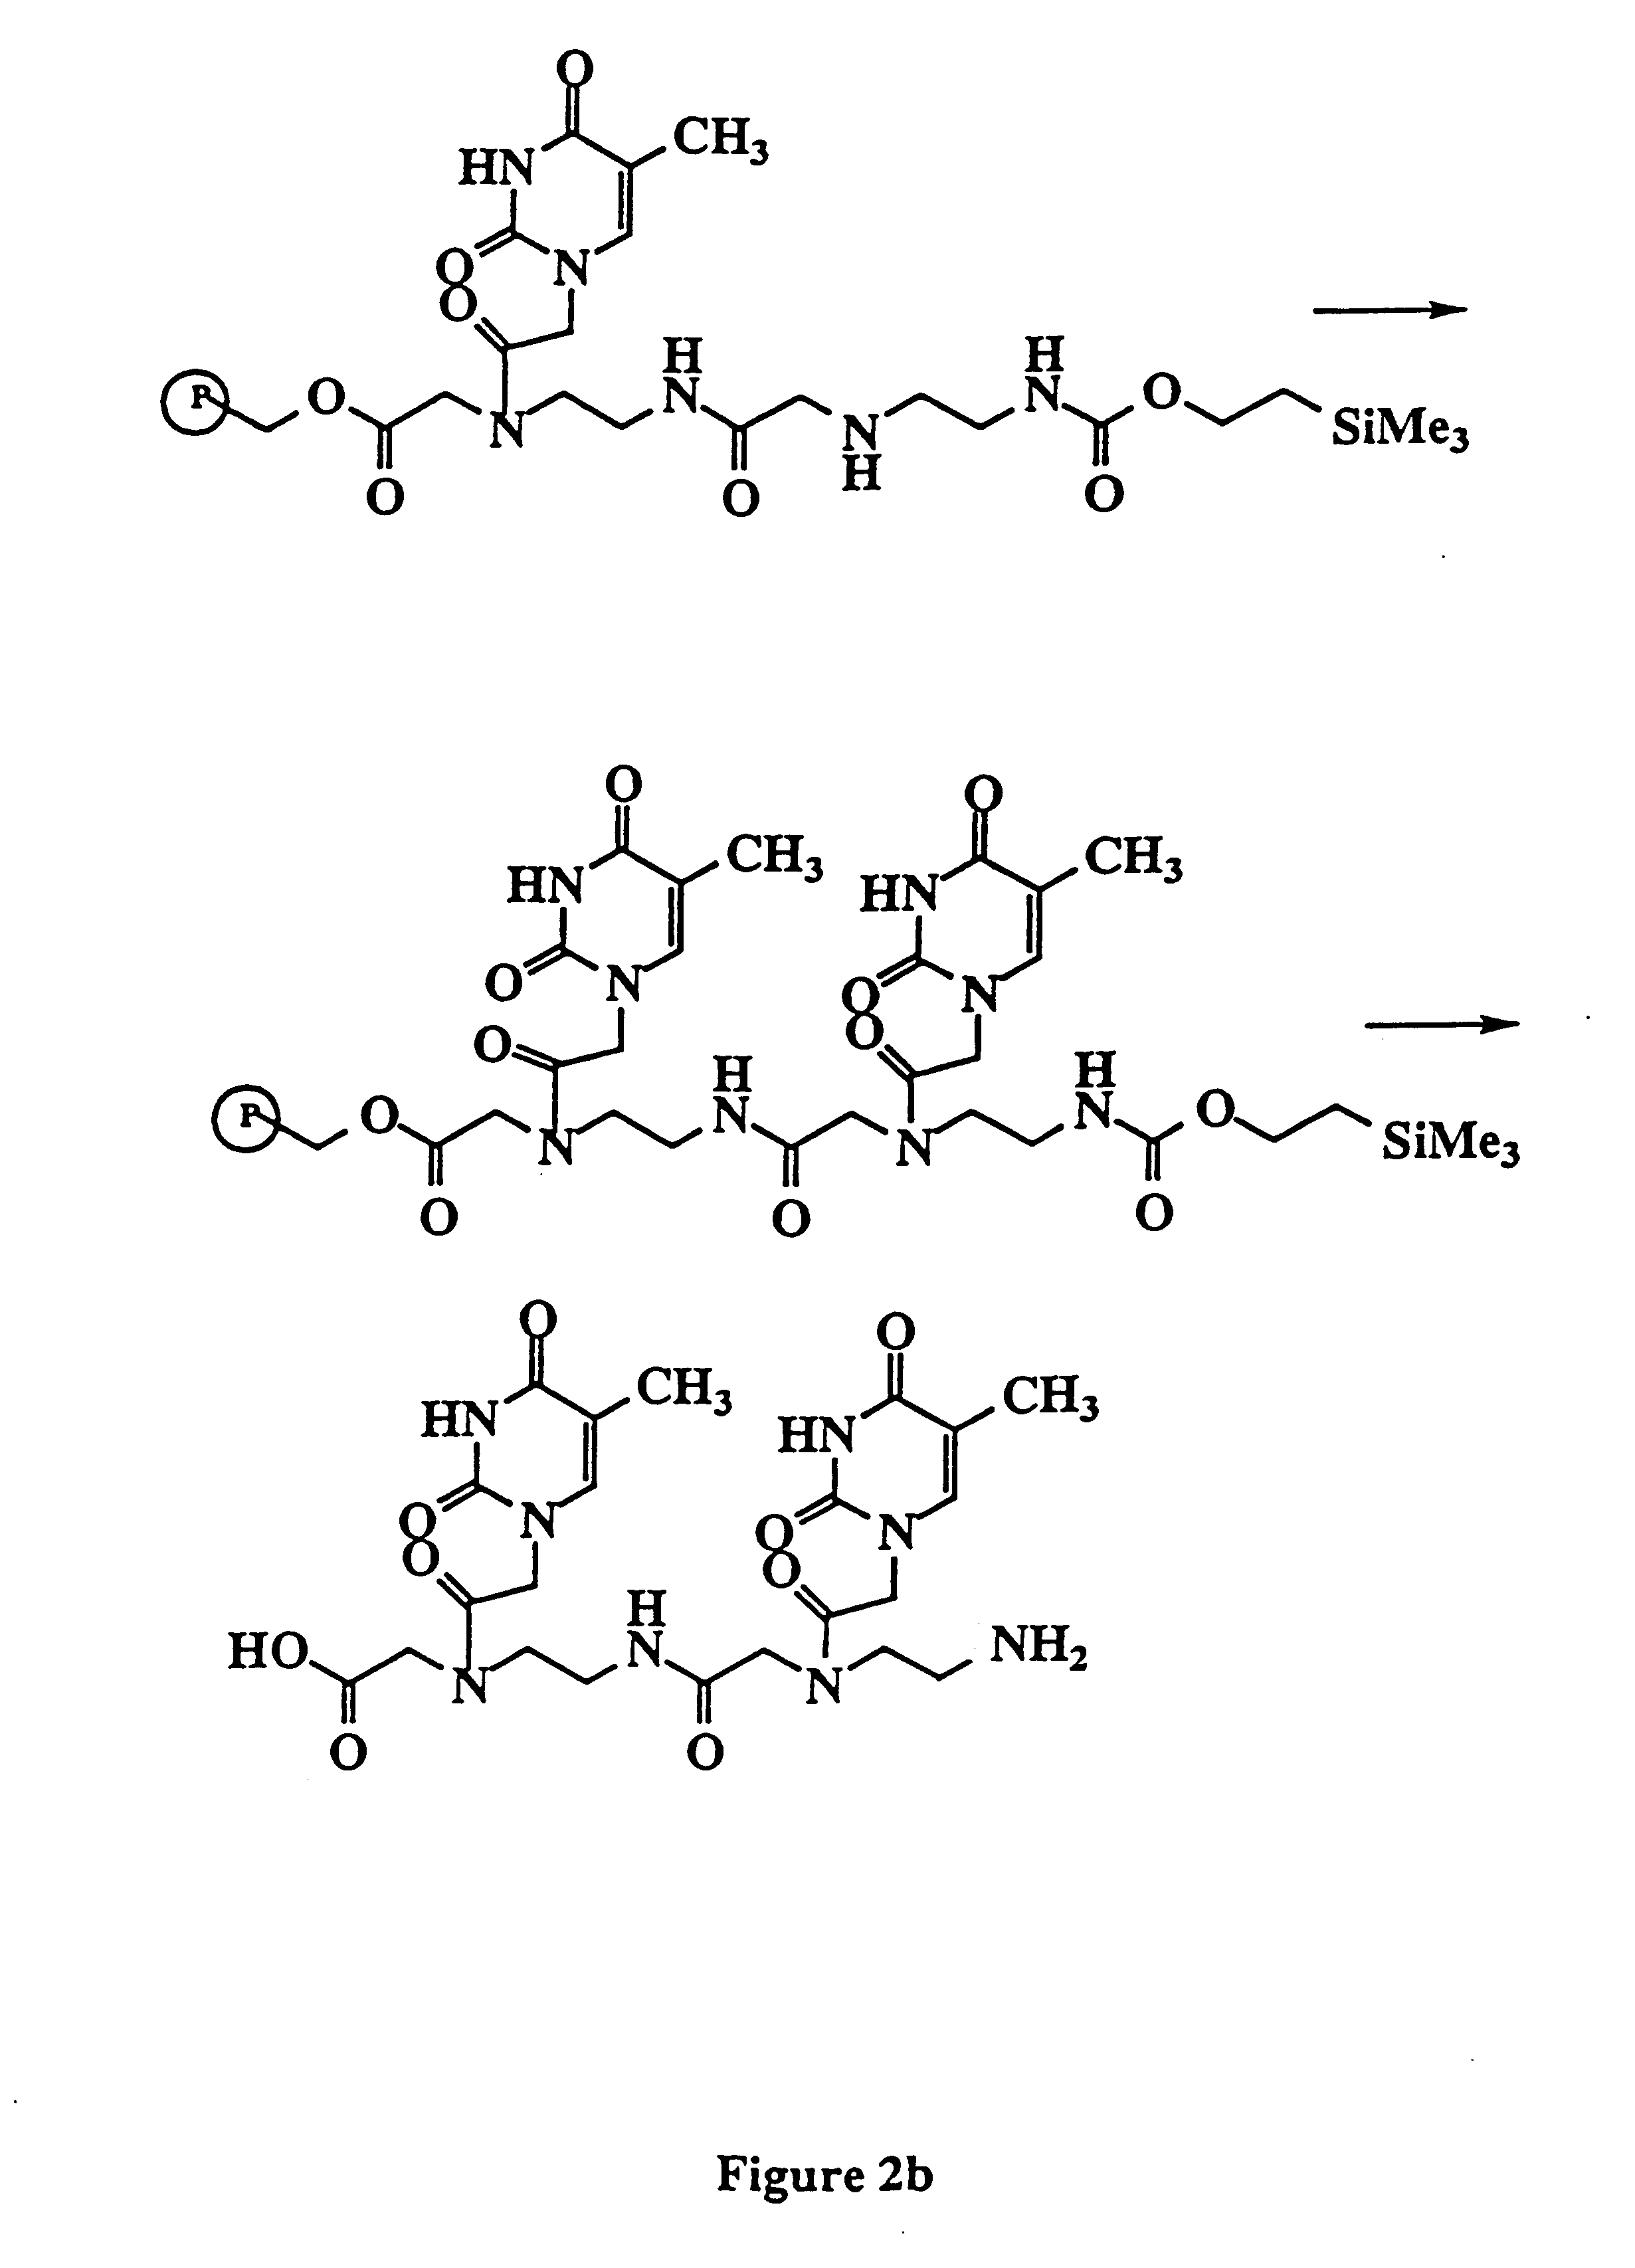 PNA combinatorial libraries and improved methods of synthesis